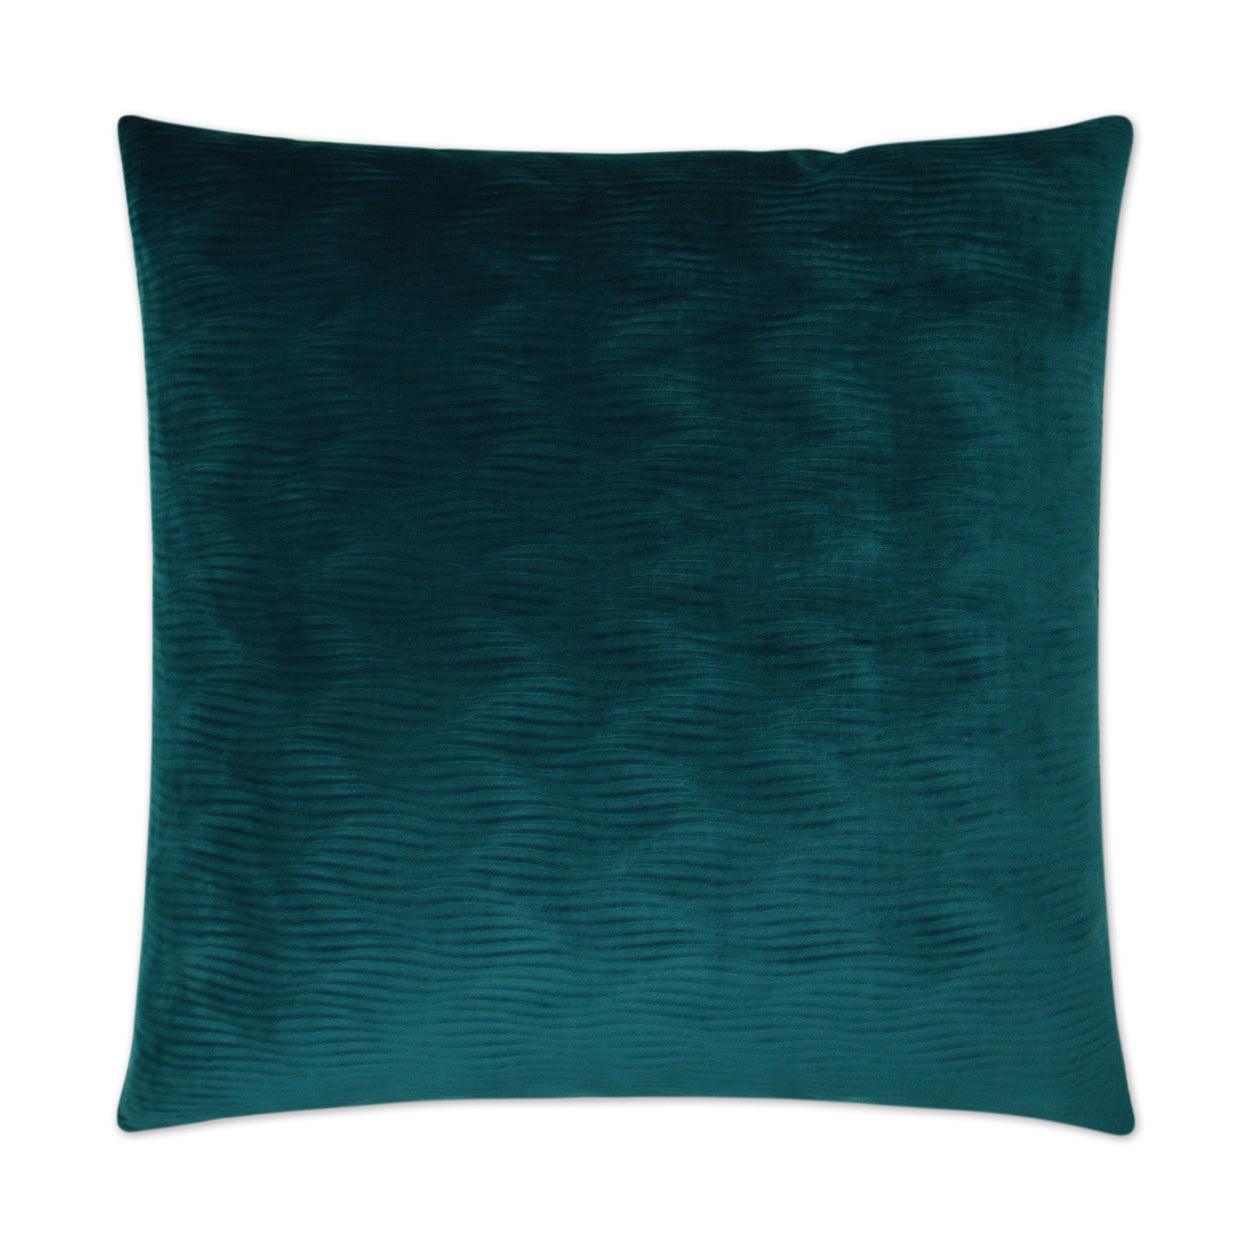 Stream Teal Solid Turquoise Teal Large Throw Pillow With Insert - Uptown Sebastian